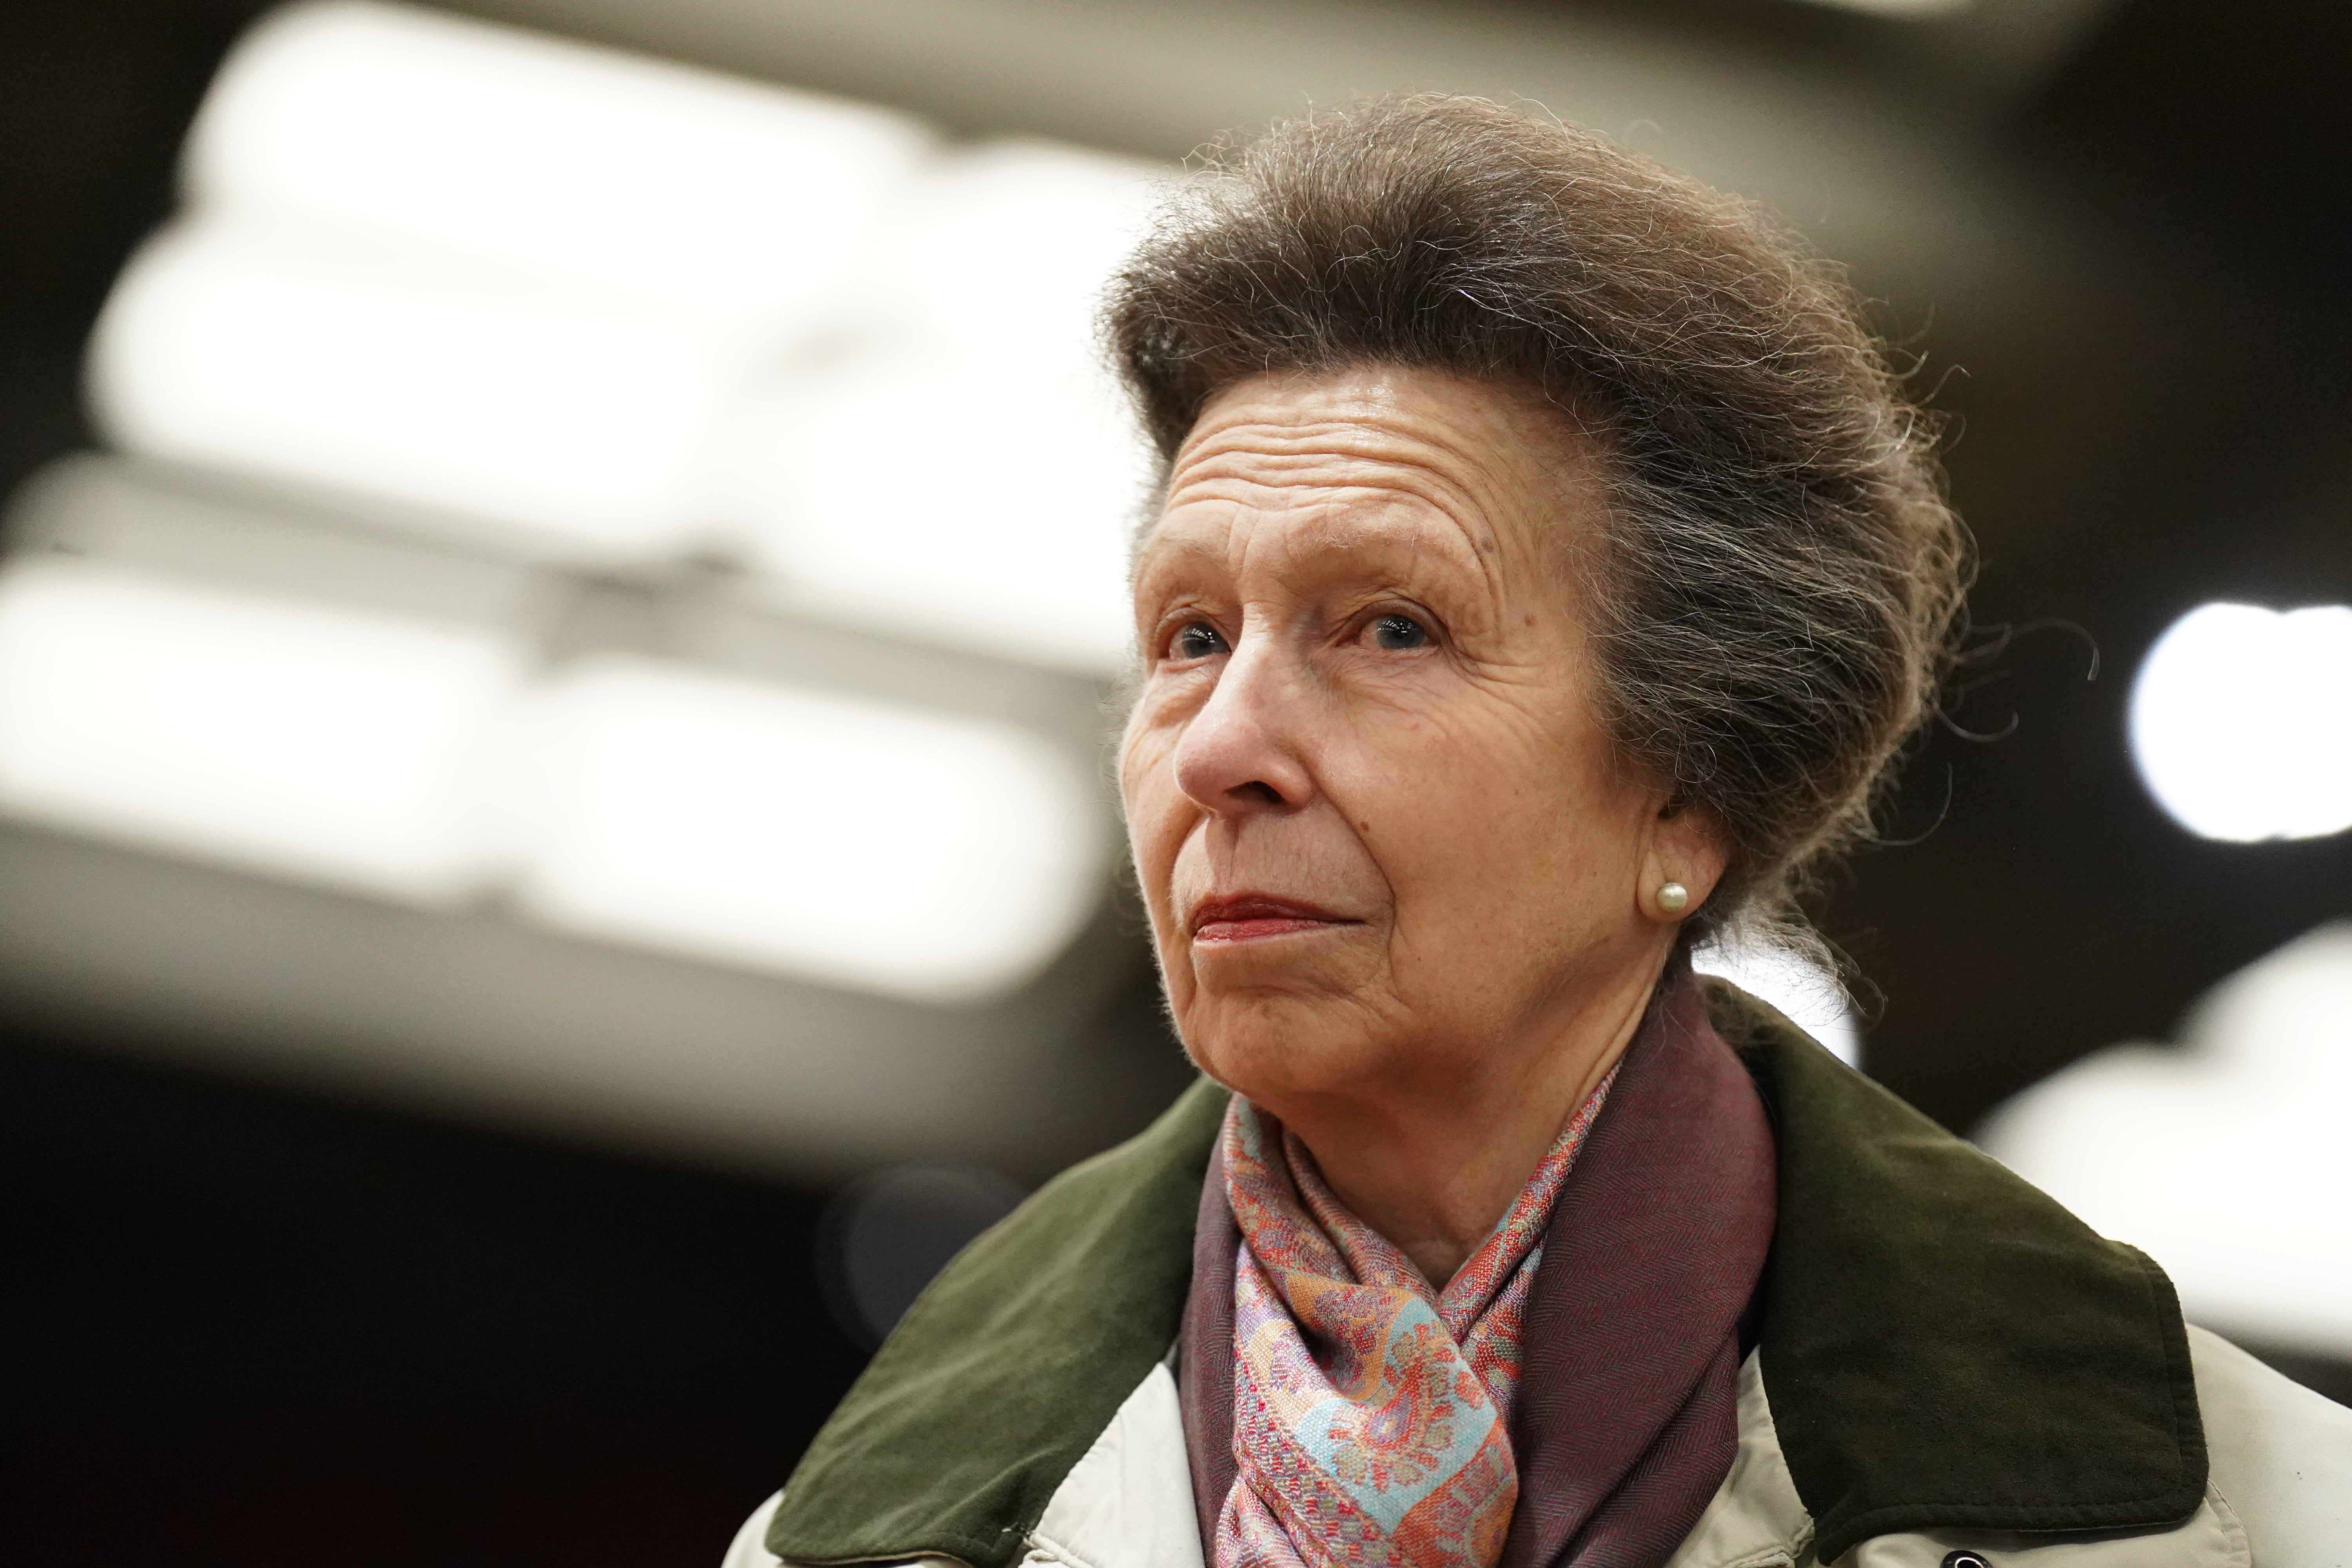 Princess Anne is in hopsital after being kicked by a horse on Sunday evening.